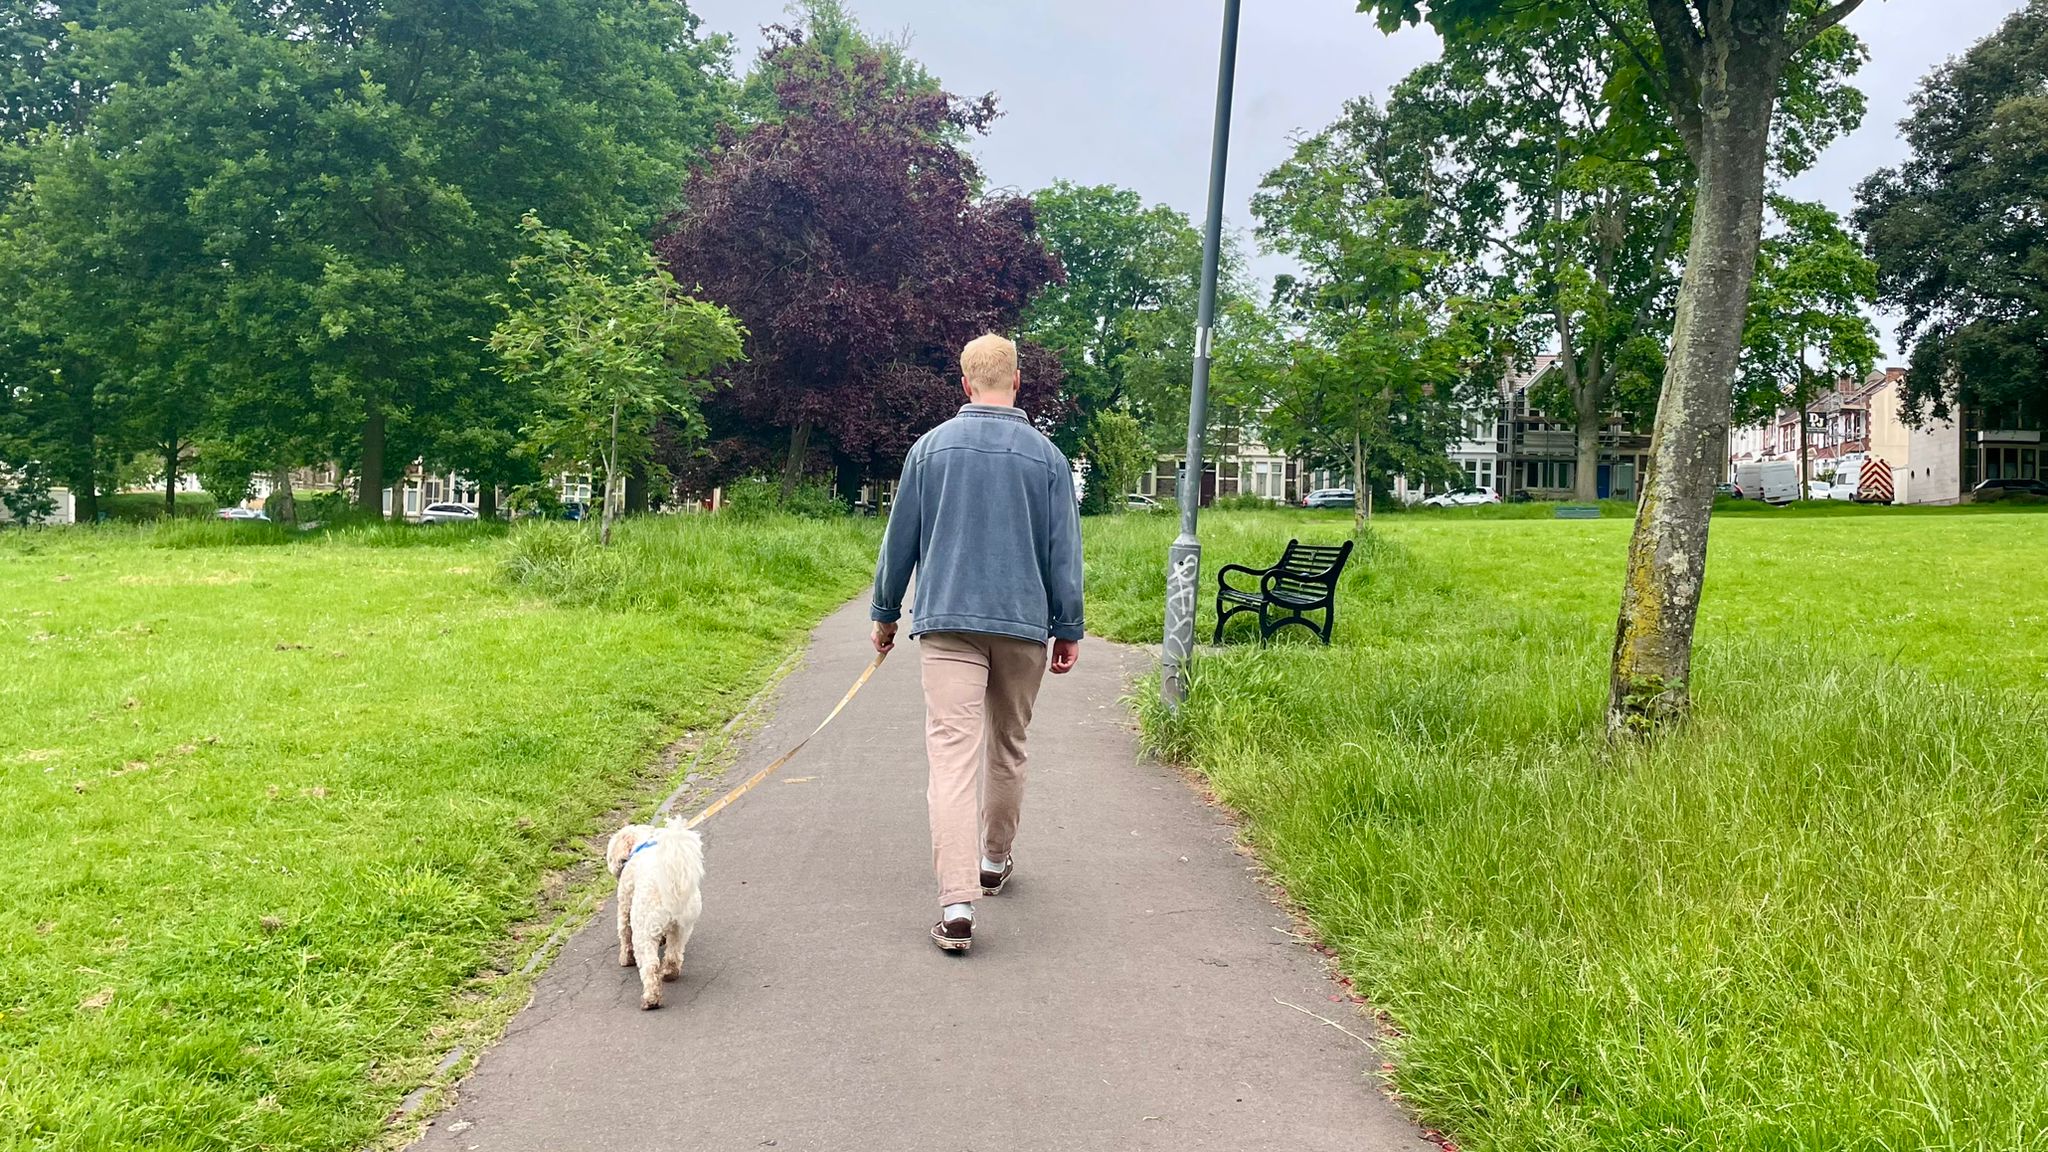 TechRadar fitness writer Harry Bullmore on a walk with his dog